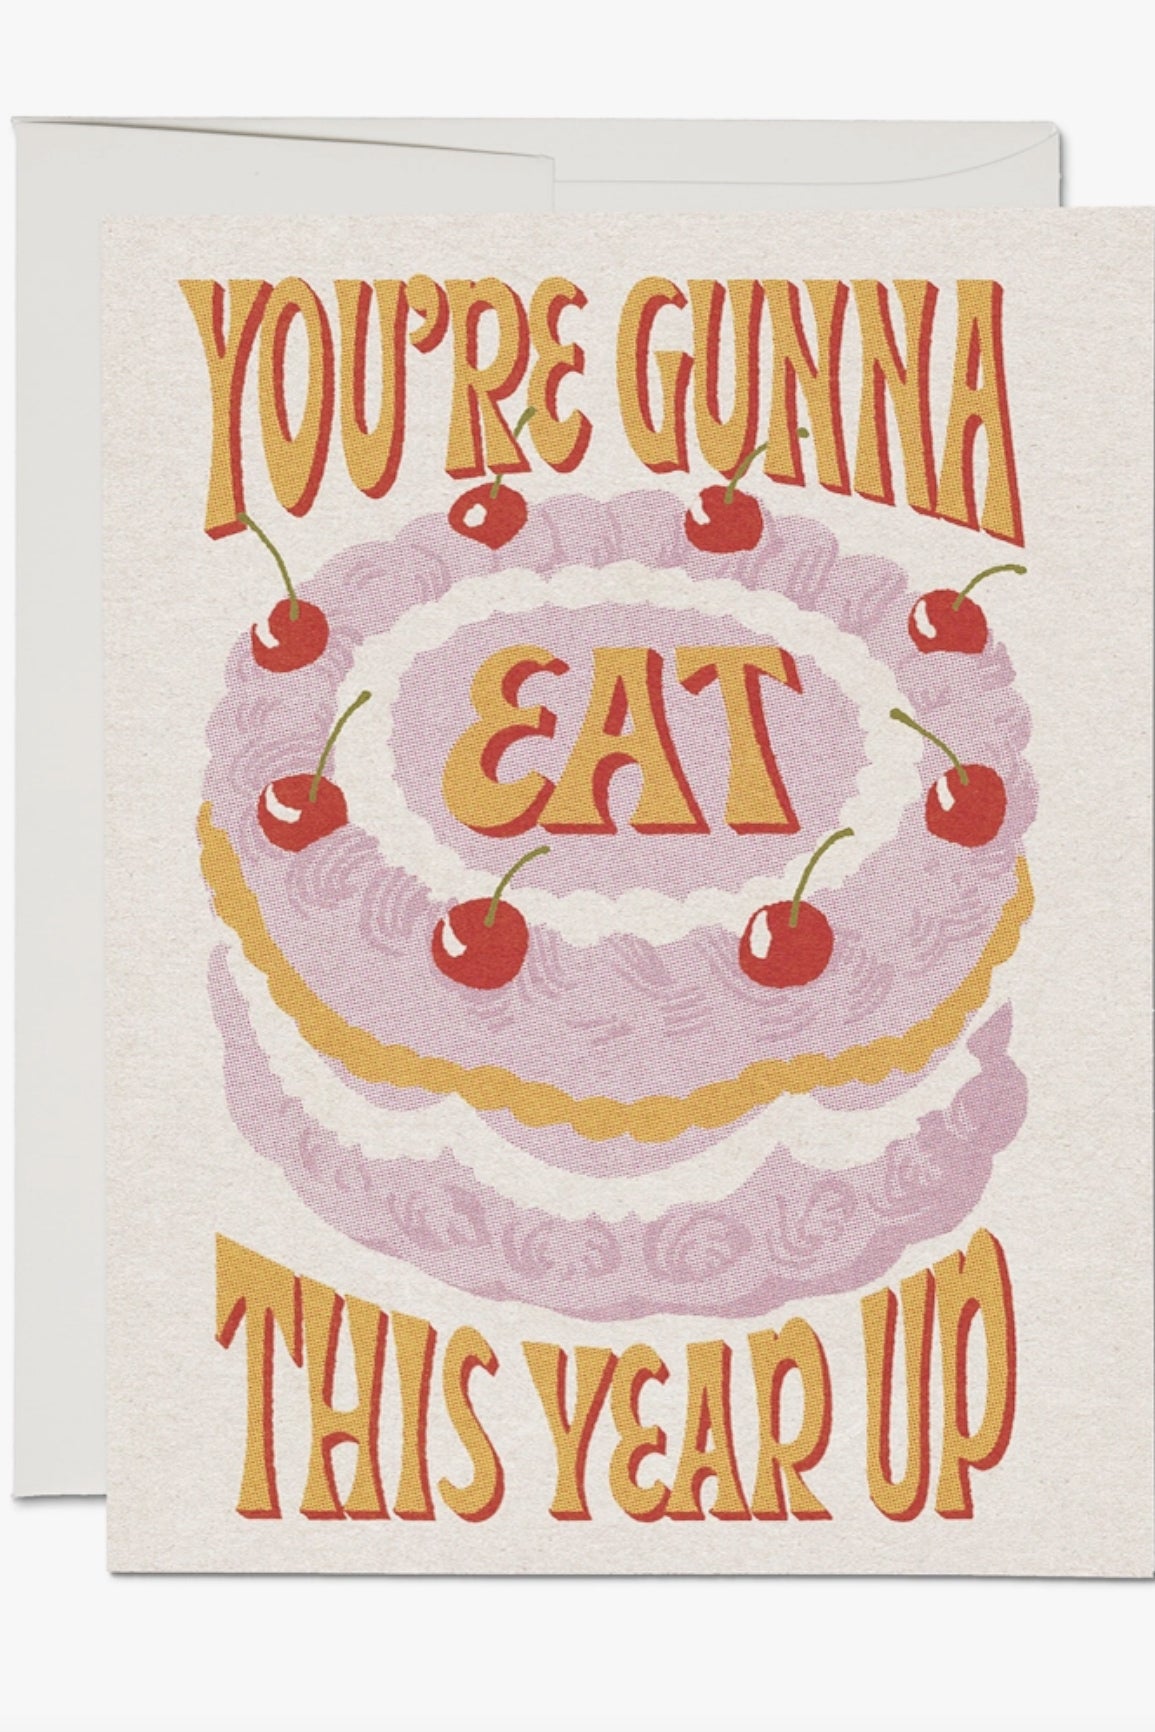 Red Cap Cards - Eat This Year Up Birthday Card